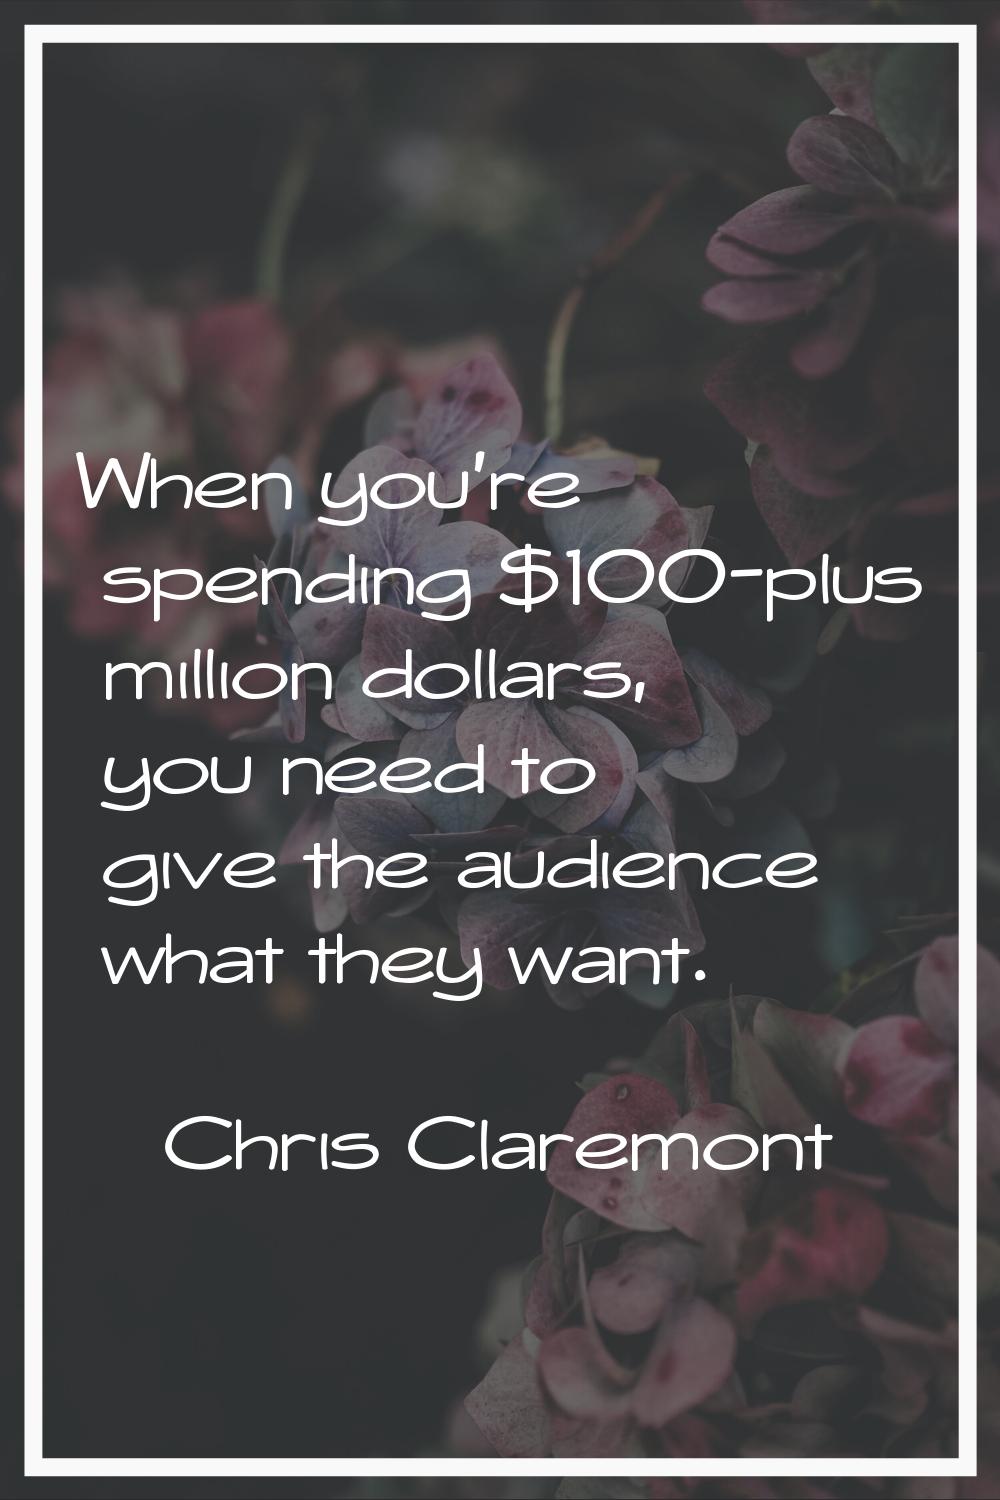 When you're spending $100-plus million dollars, you need to give the audience what they want.